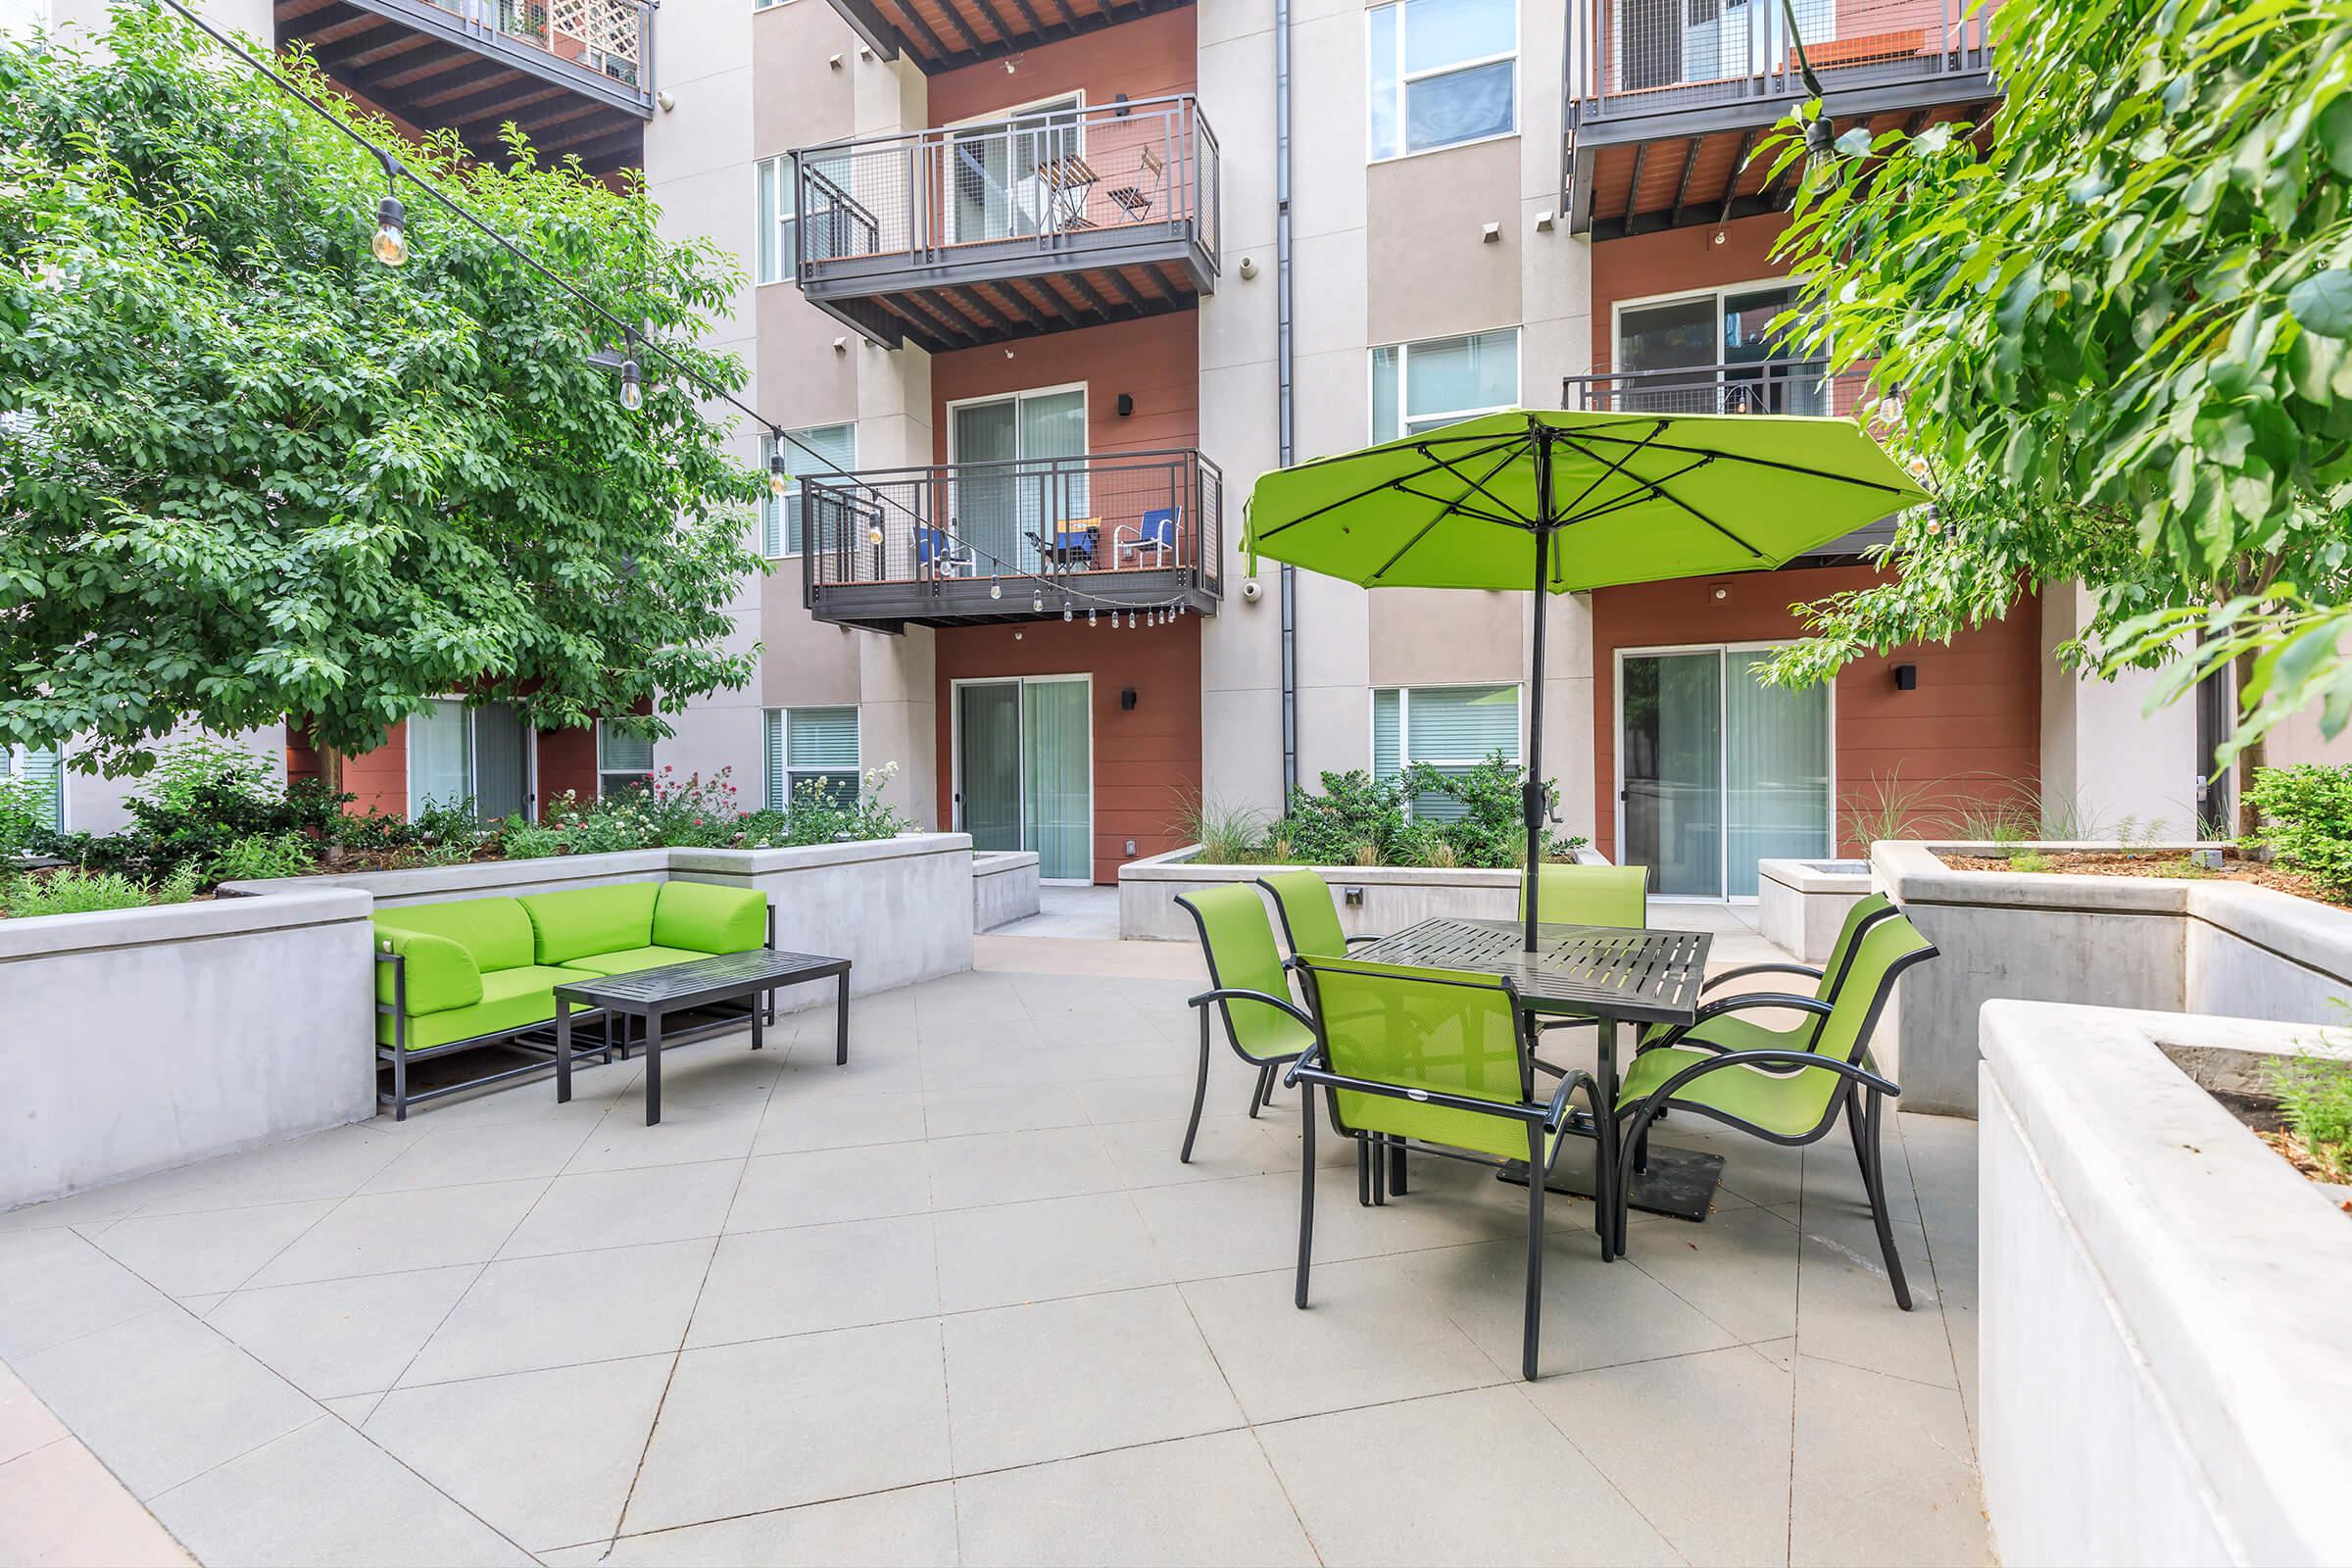 UPSCALE APARTMENT LIVING IN ARVADA, CO